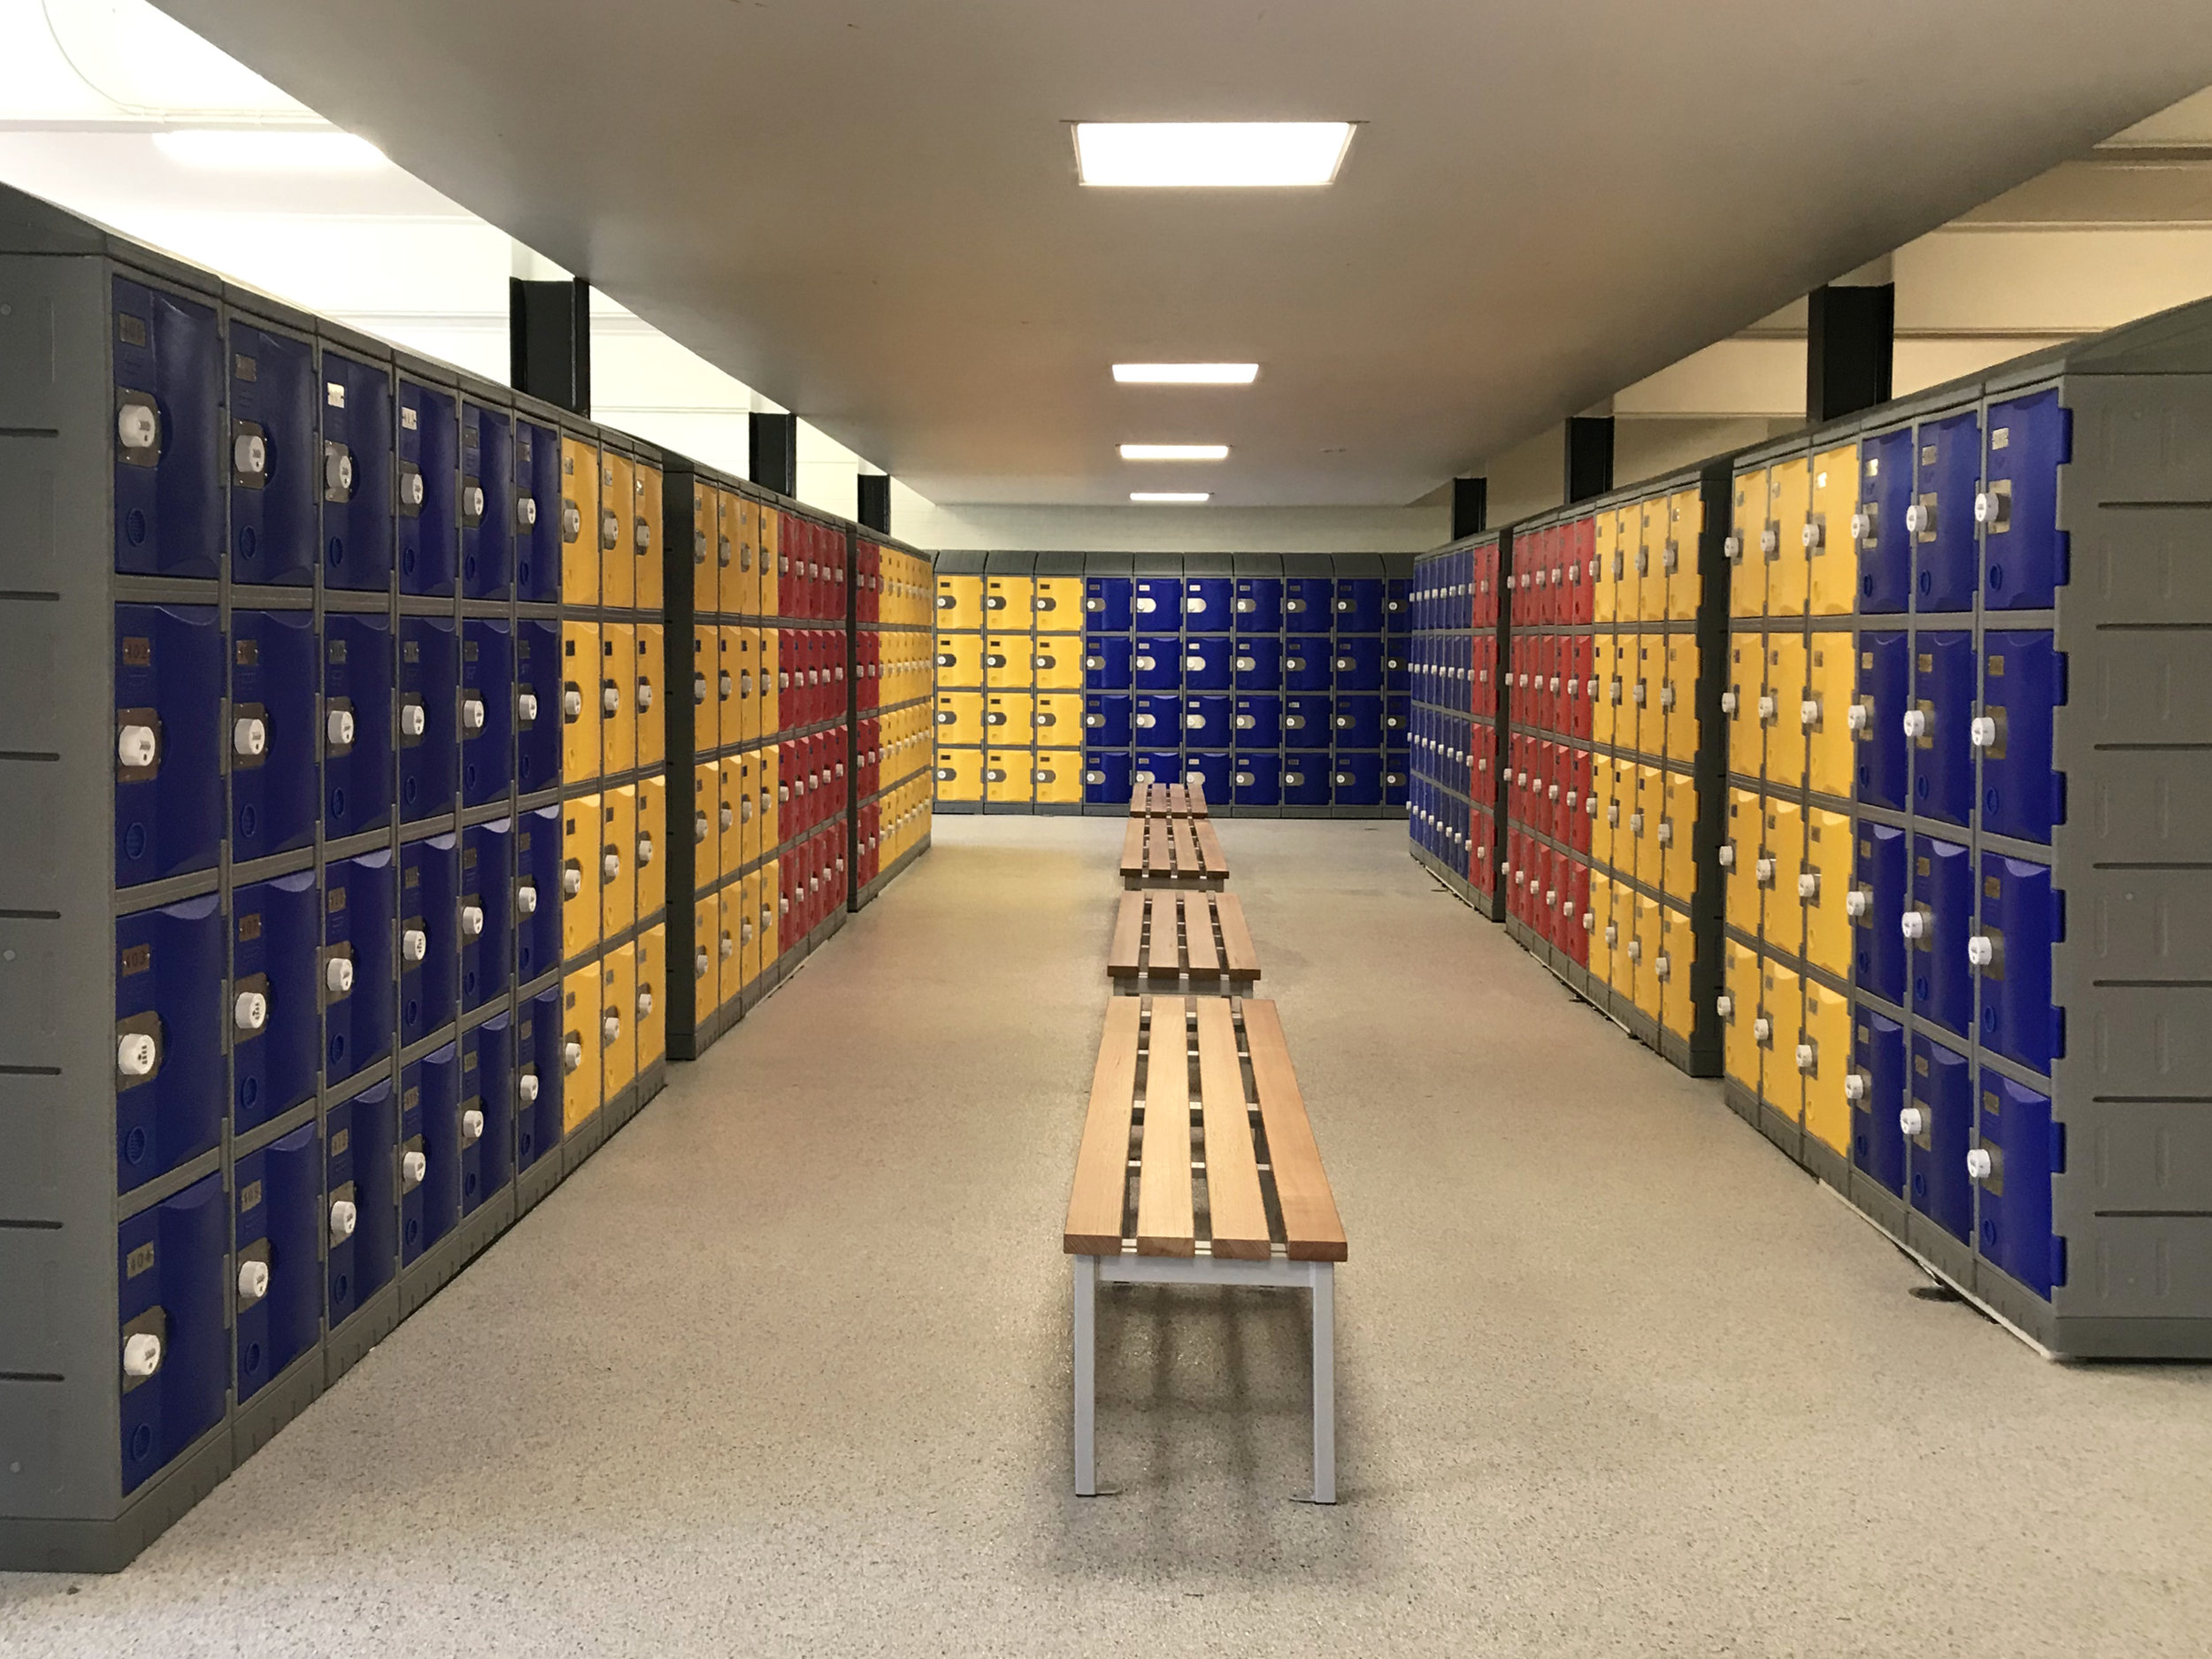 Bays of red, yellow and blue heavy duty plastic lockers.